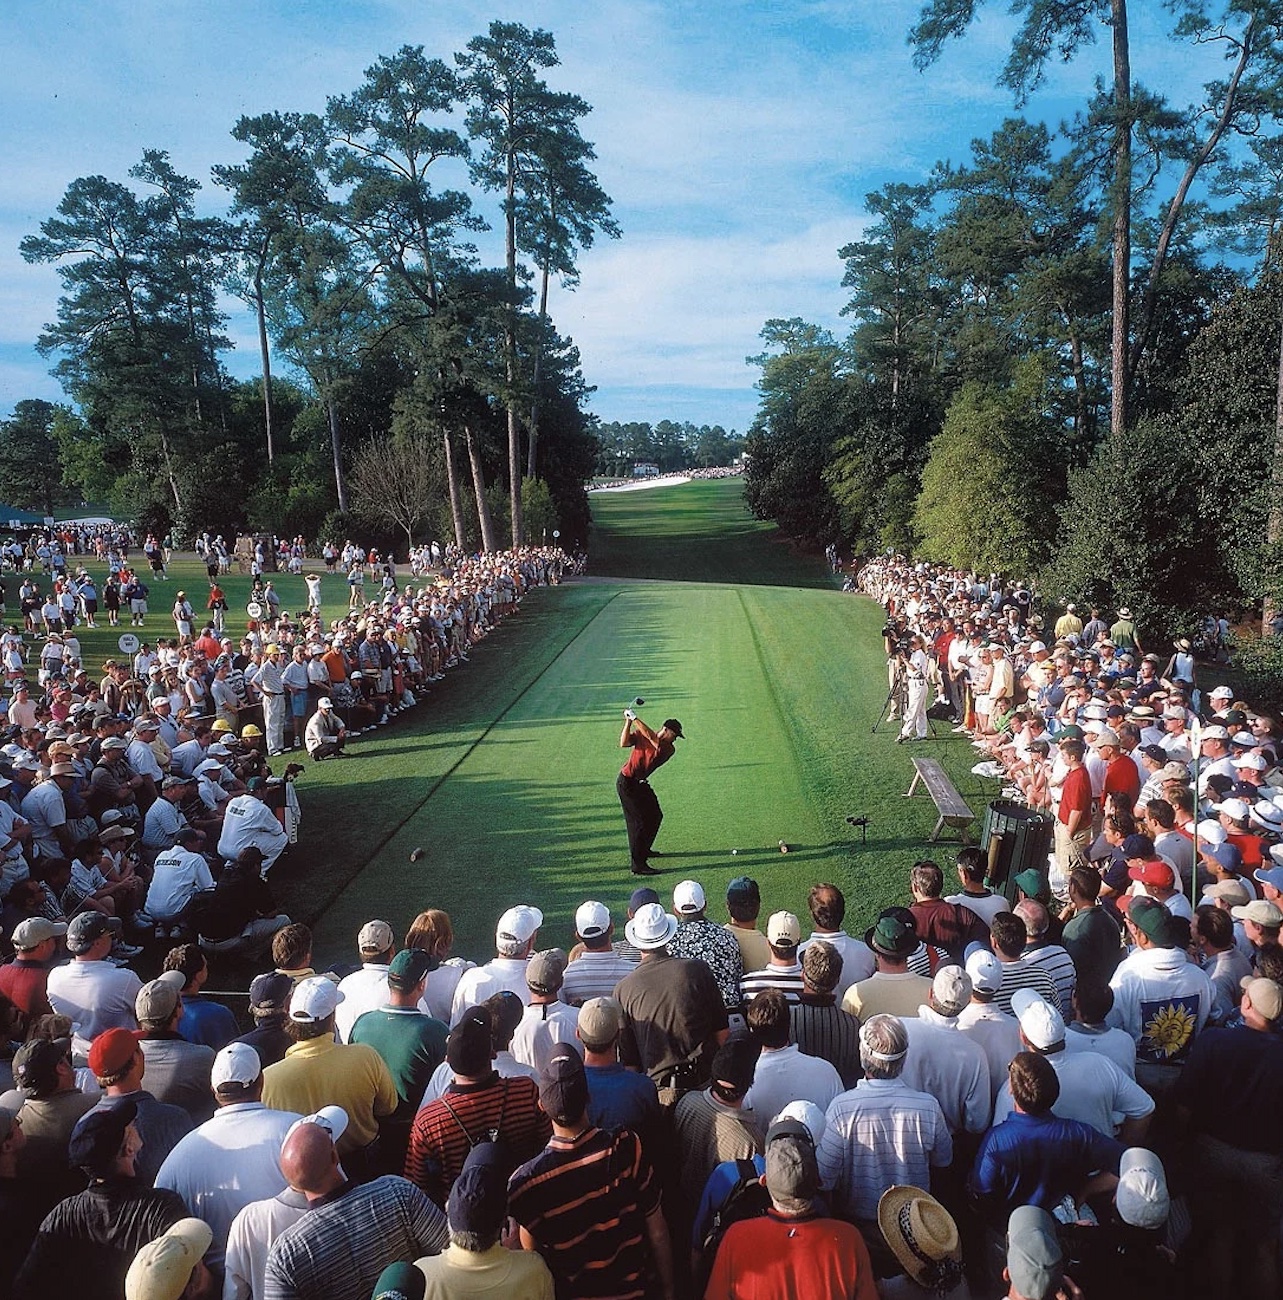 Most iconic fascinating sports photos - tiger woods 2001 masters